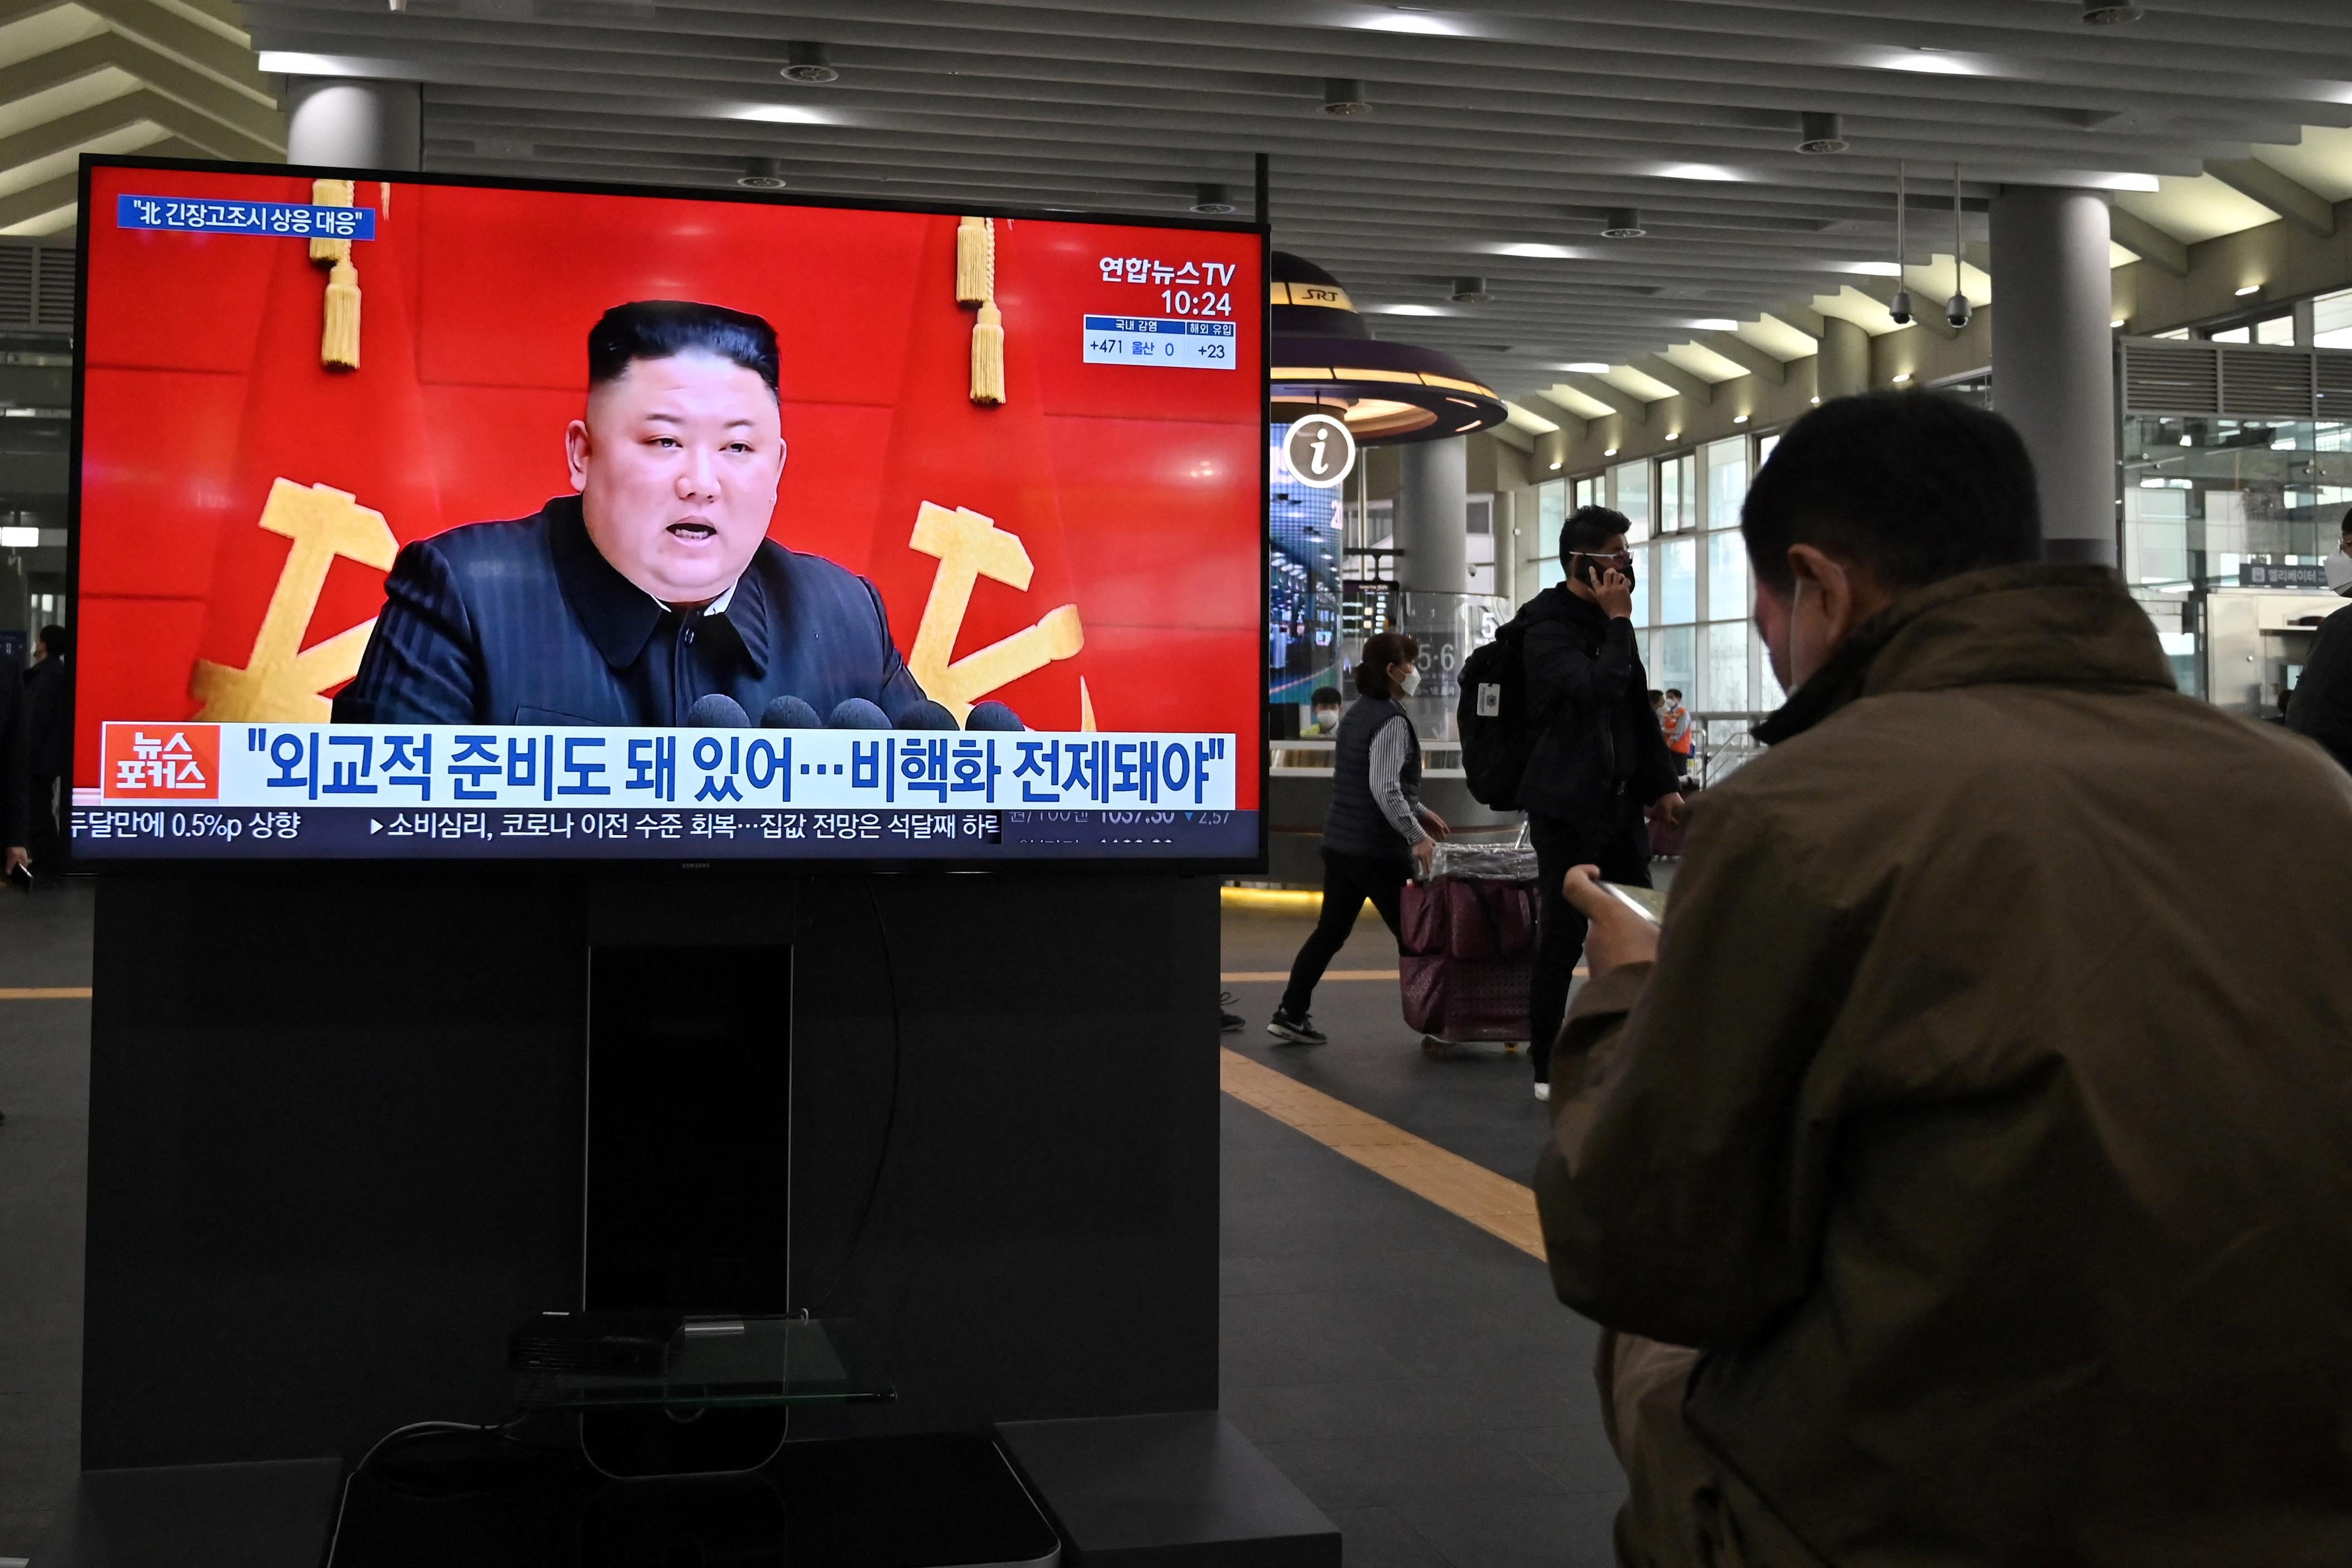 People watch a television screen at Suseo railway station in Seoul on March 26, 2021, showing file footage of North Korea's leader Kim Jong Un.